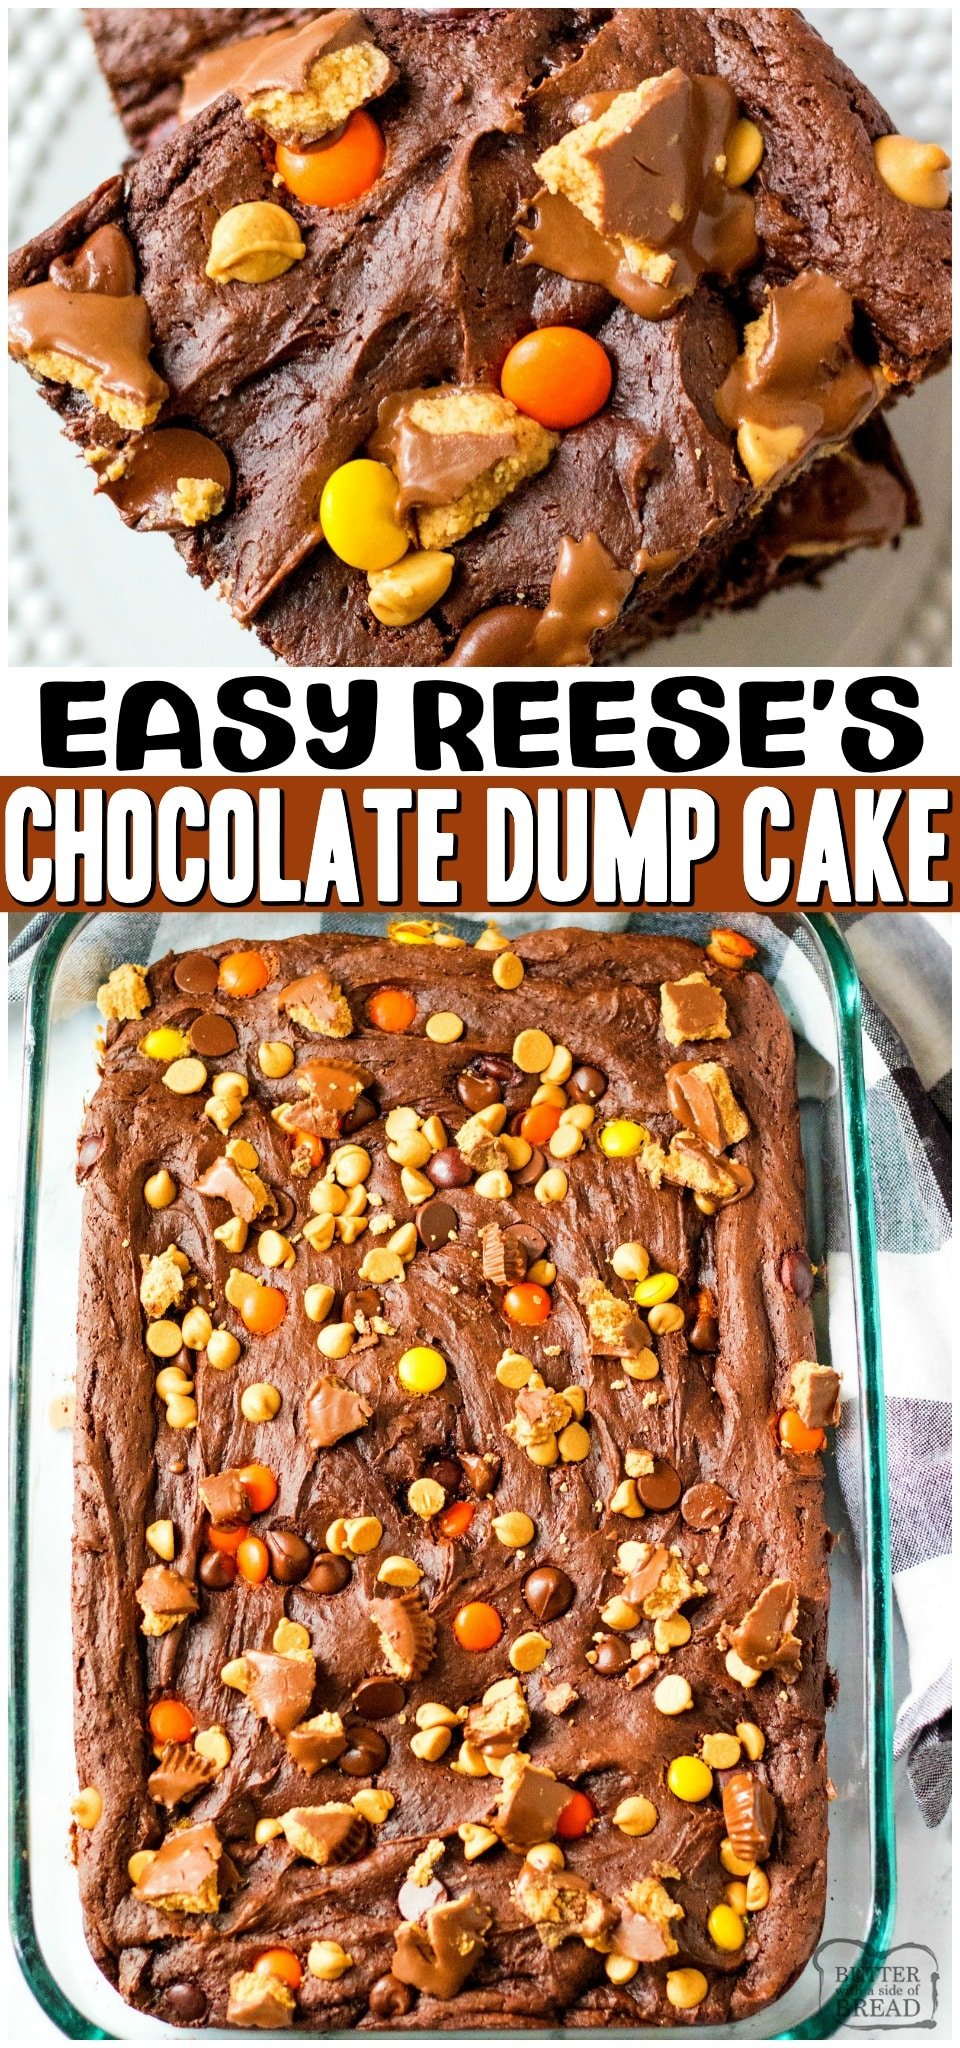 Easy Reese’s Chocolate Dump cake recipe is so simple to make! Dump Cake= Cake mix + pudding! Rich, fudgy chocolate cake topped with chocolate chips, peanut butter chips and Reese’s pieces. #dumpcake #chocolate #reeses #easycake #cakerecipe #peanutbutter #baking #dessert #Fall from BUTTER WITH A SIDE OF BREAD